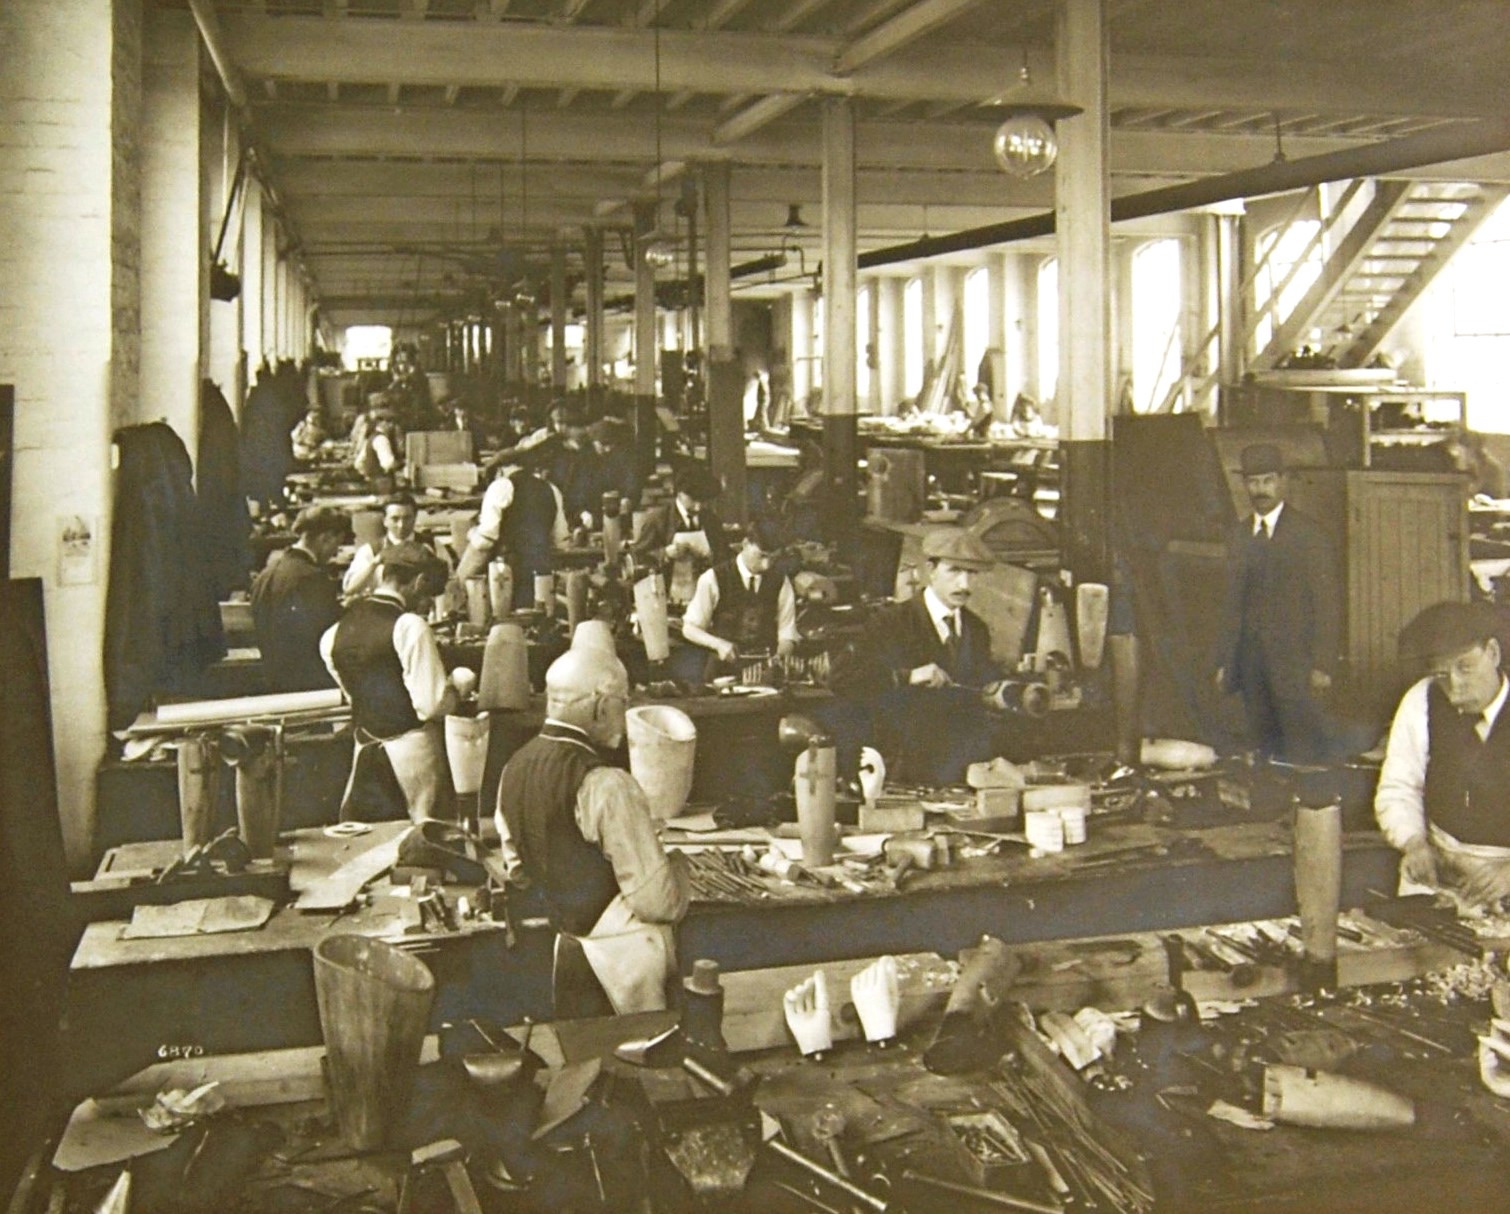 Workshop on the Clyde where artificial limbs were produced for Erskine